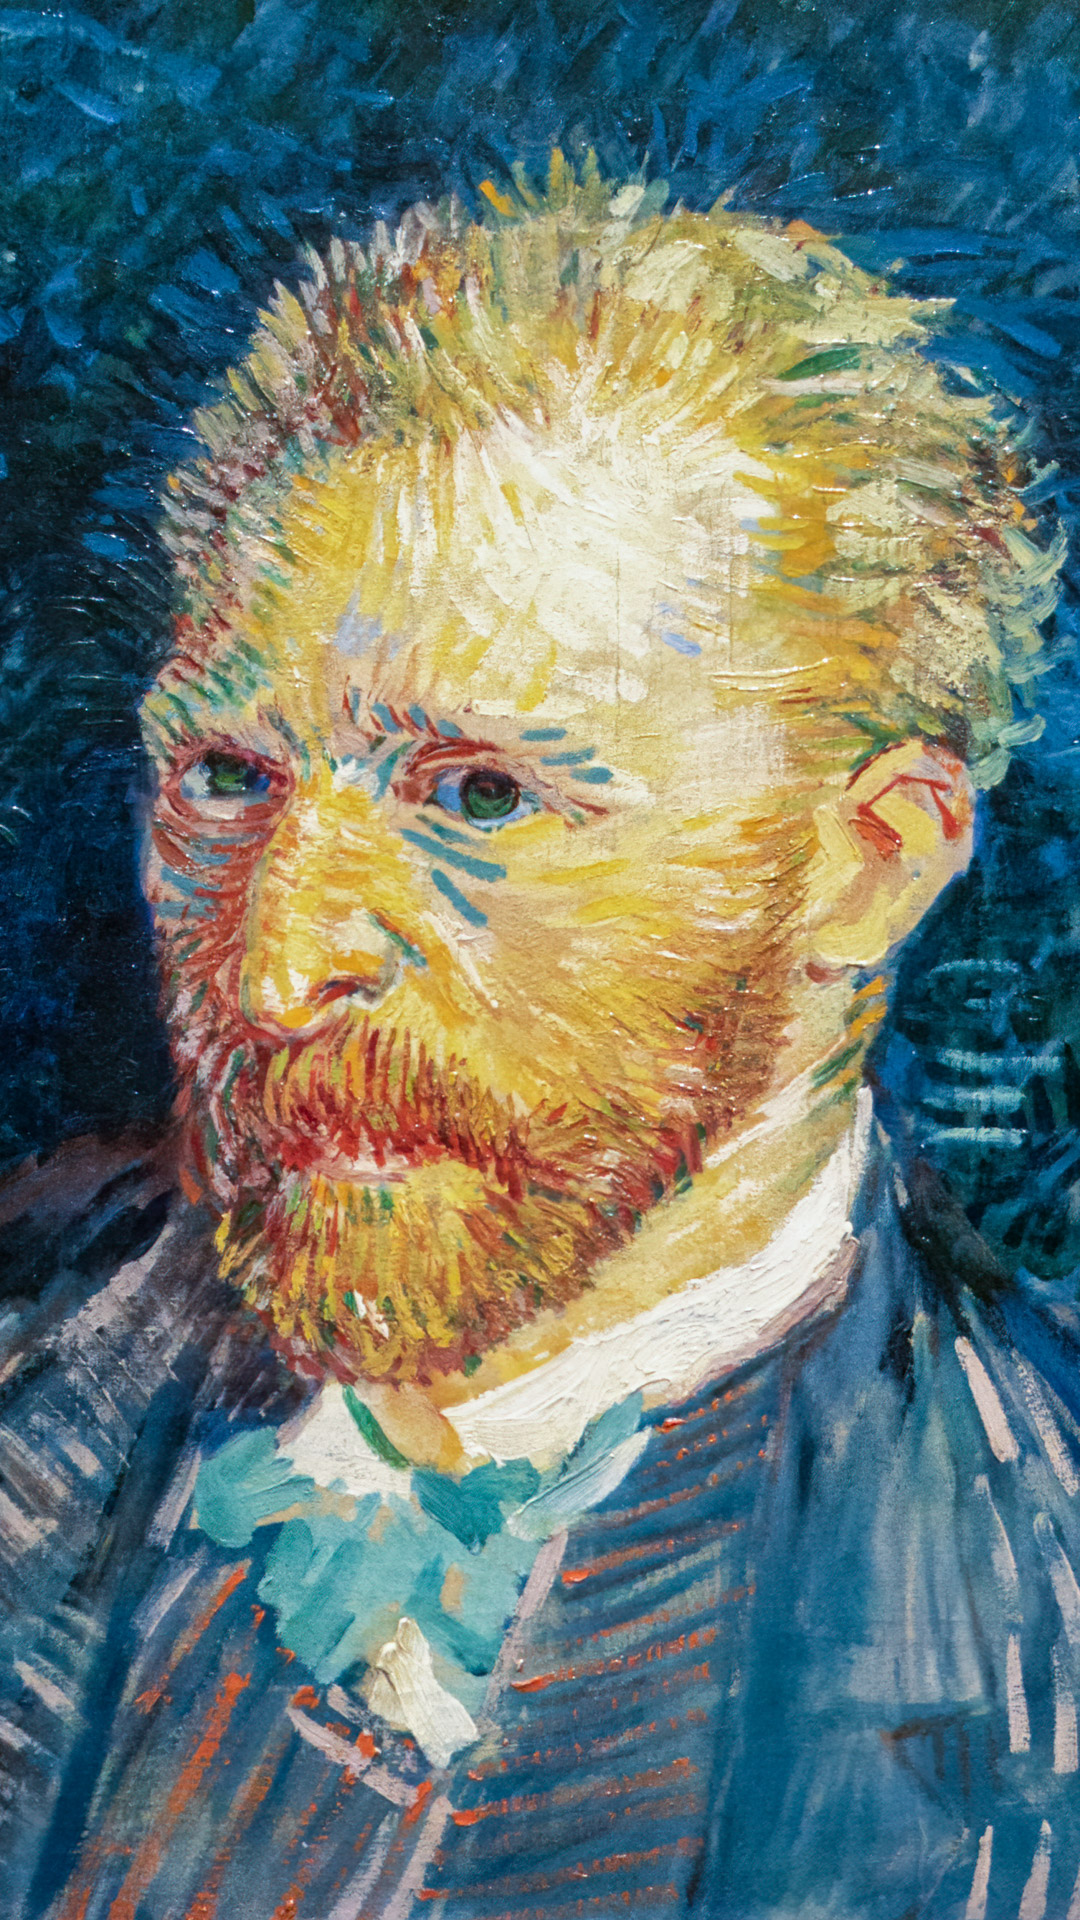 Carry the brilliance of Vincent van Gogh's 'Portrait of the Artist' with you on your mobile device.